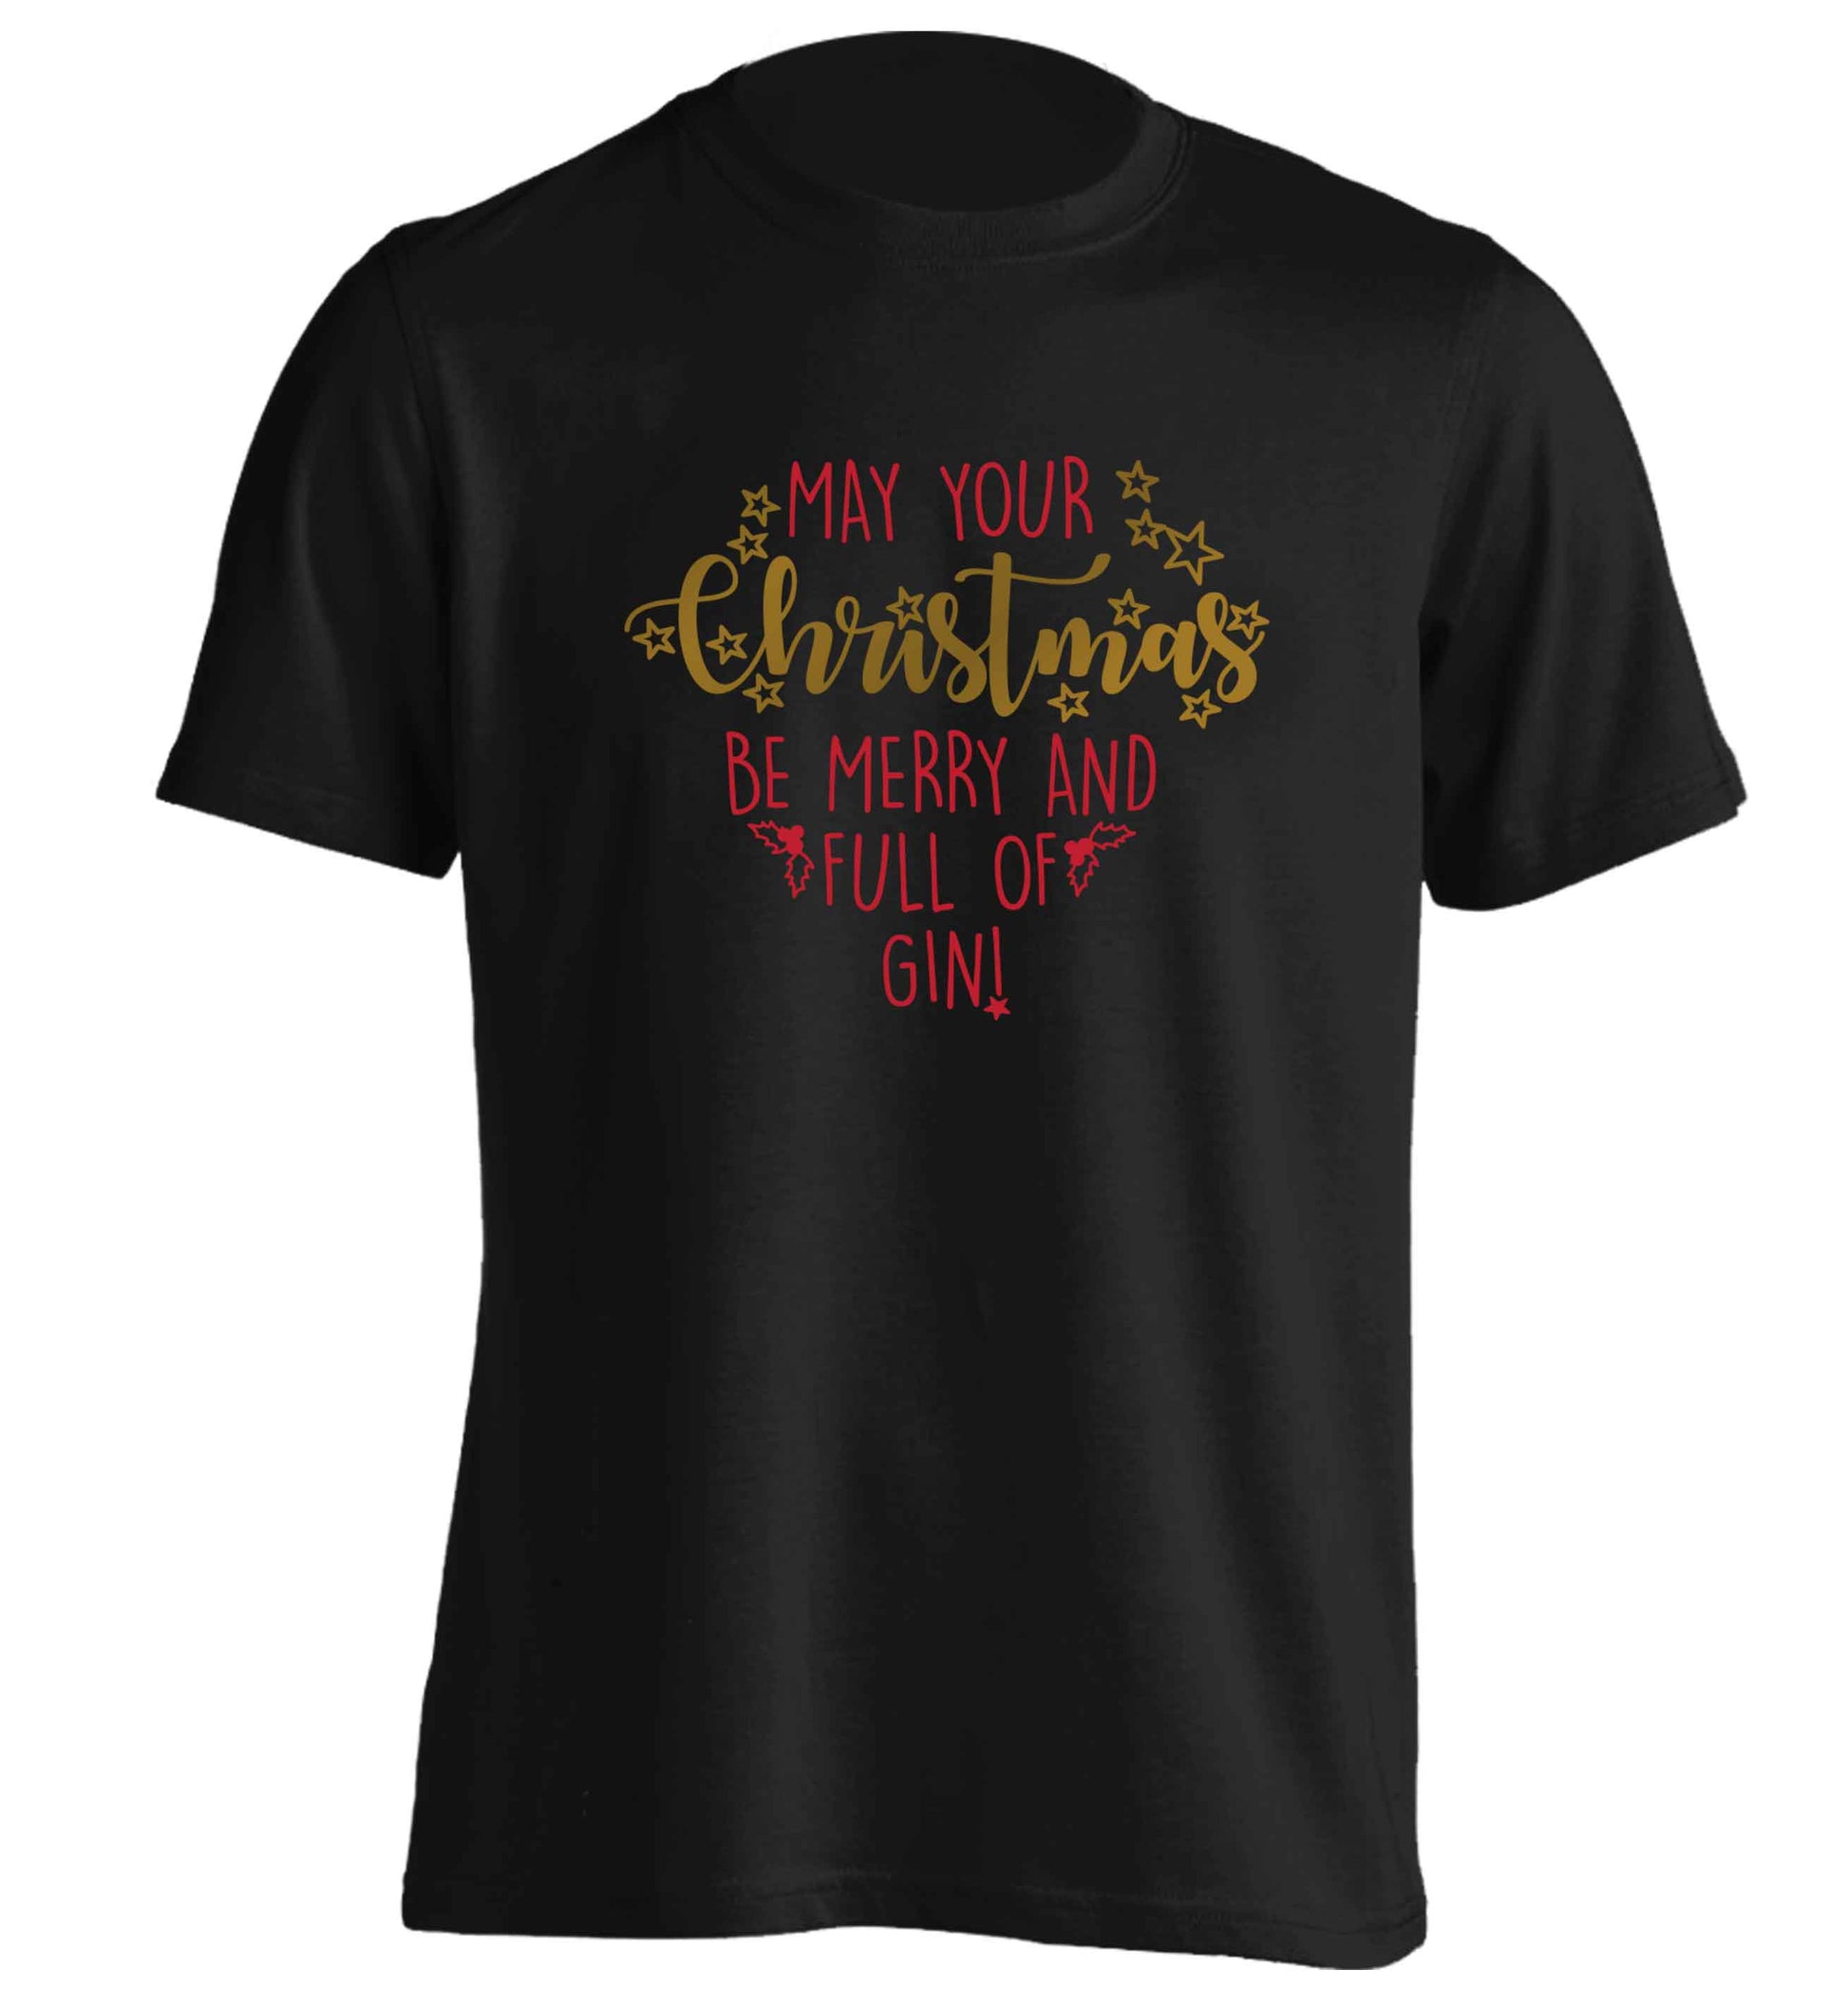 May your Christmas be merry and full of gin adults unisex black Tshirt 2XL